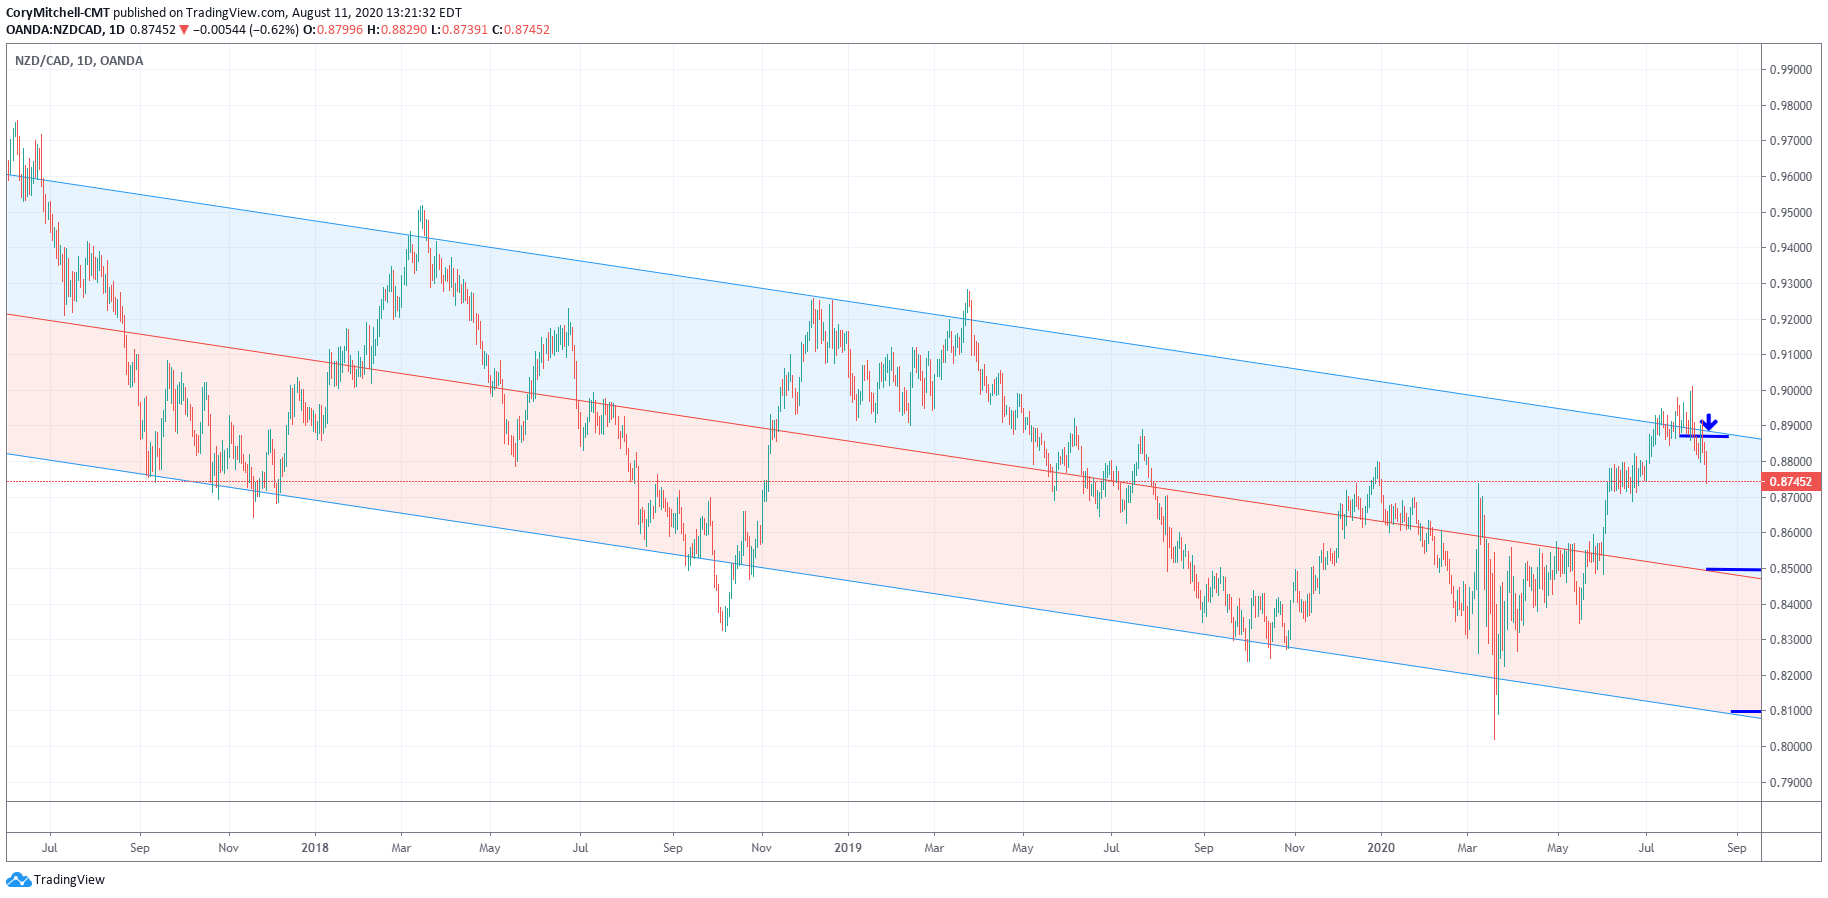 NZDCAD selling off near top of descending channel August 11 2020